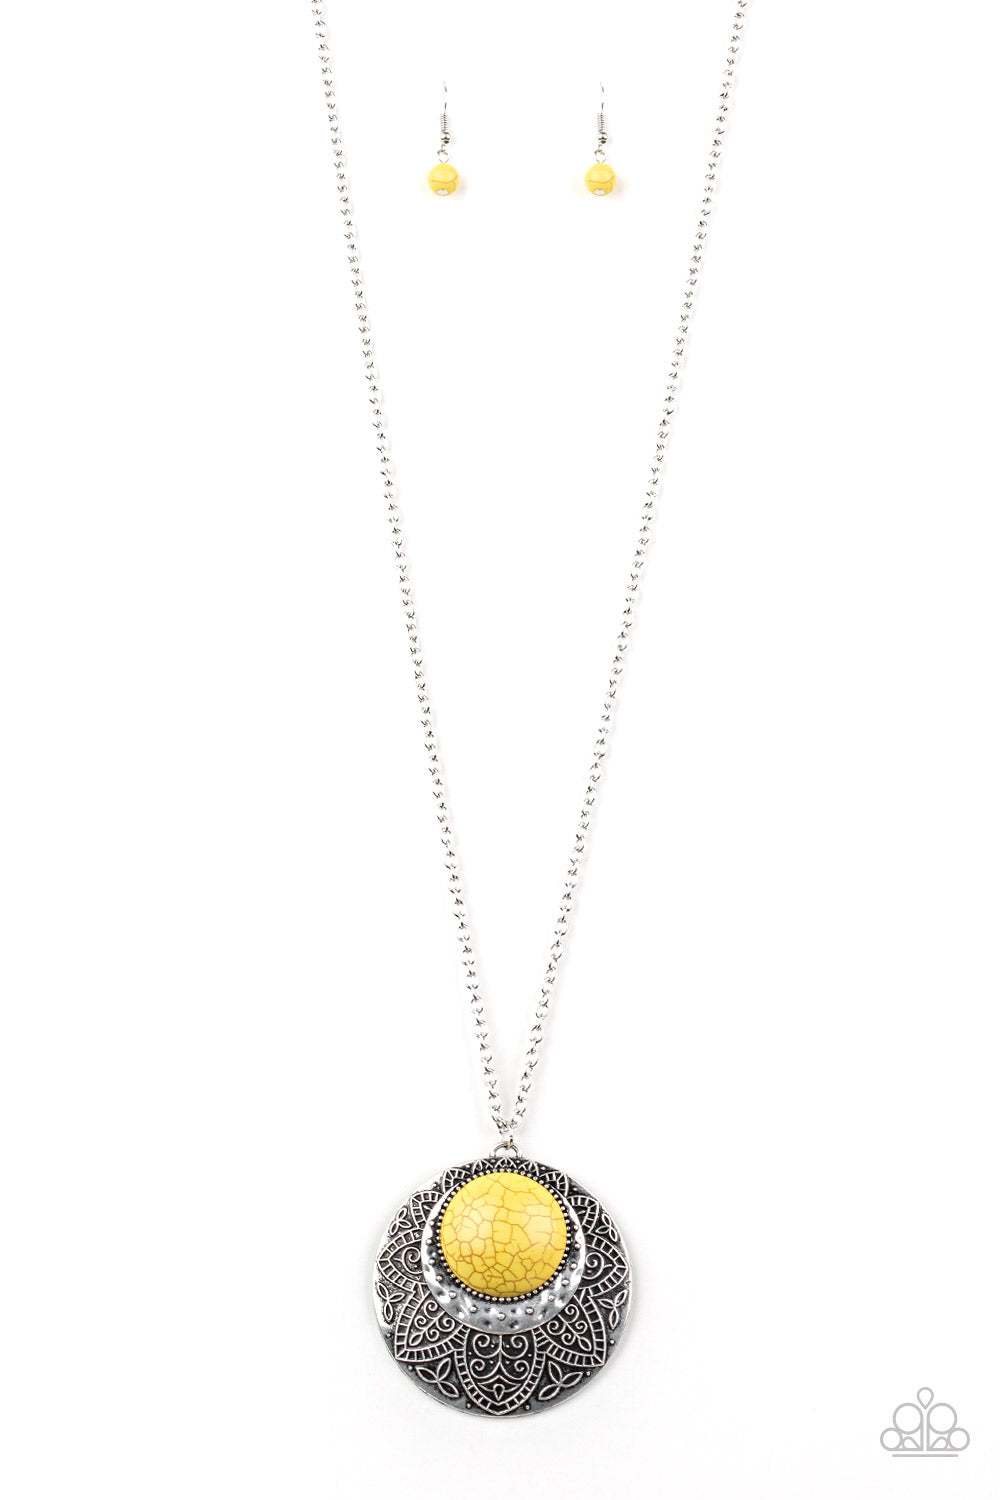 MEDALLION MEADOW - YELLOW SAND STONE NECKLACE